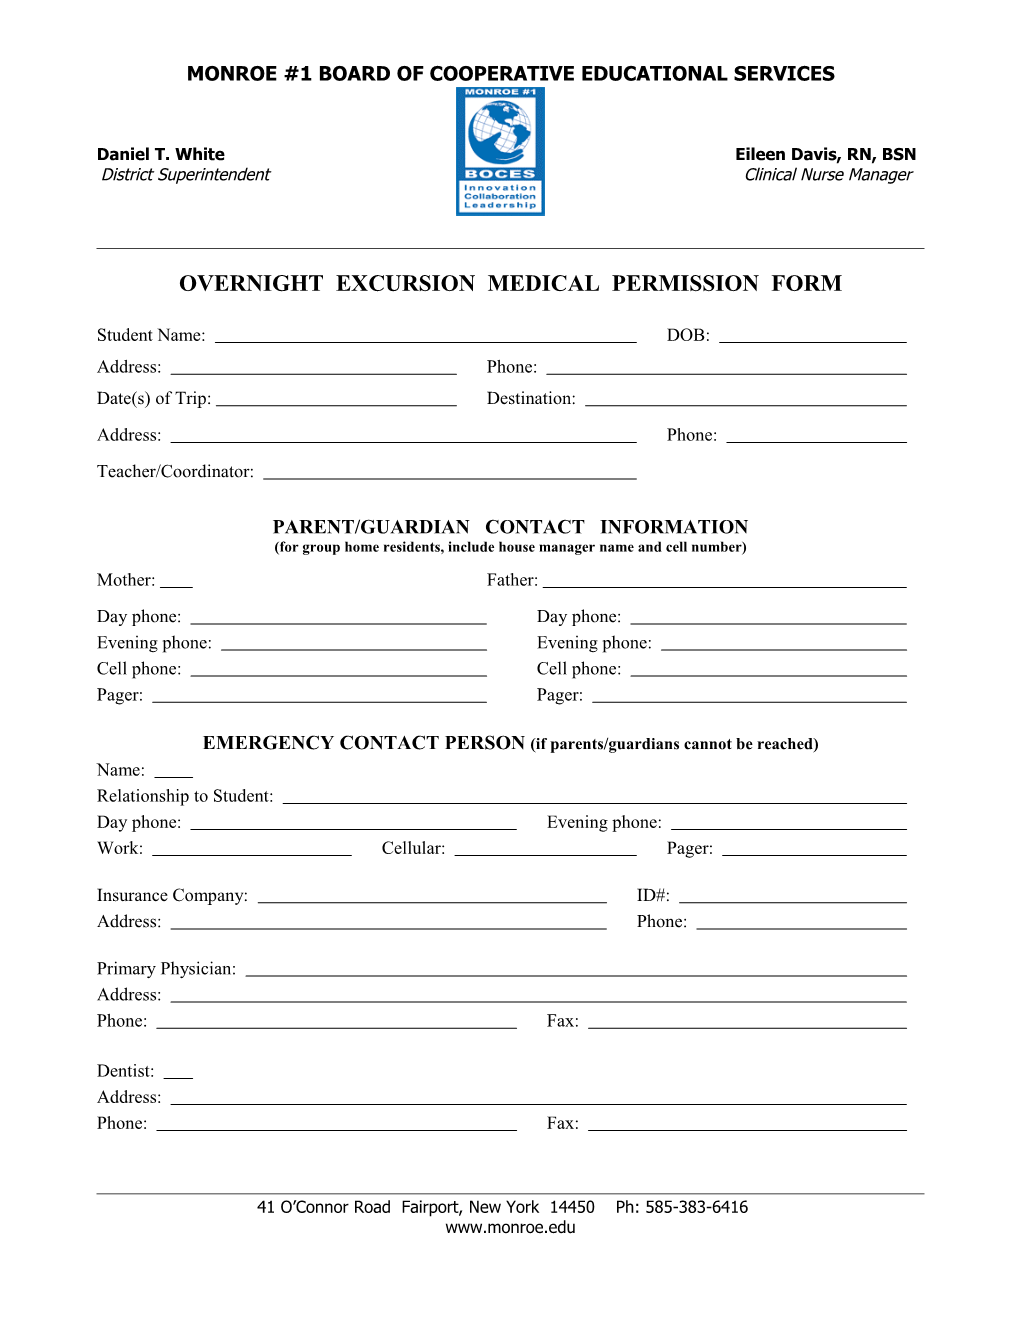 Overnight Excursion Medical Permission Form